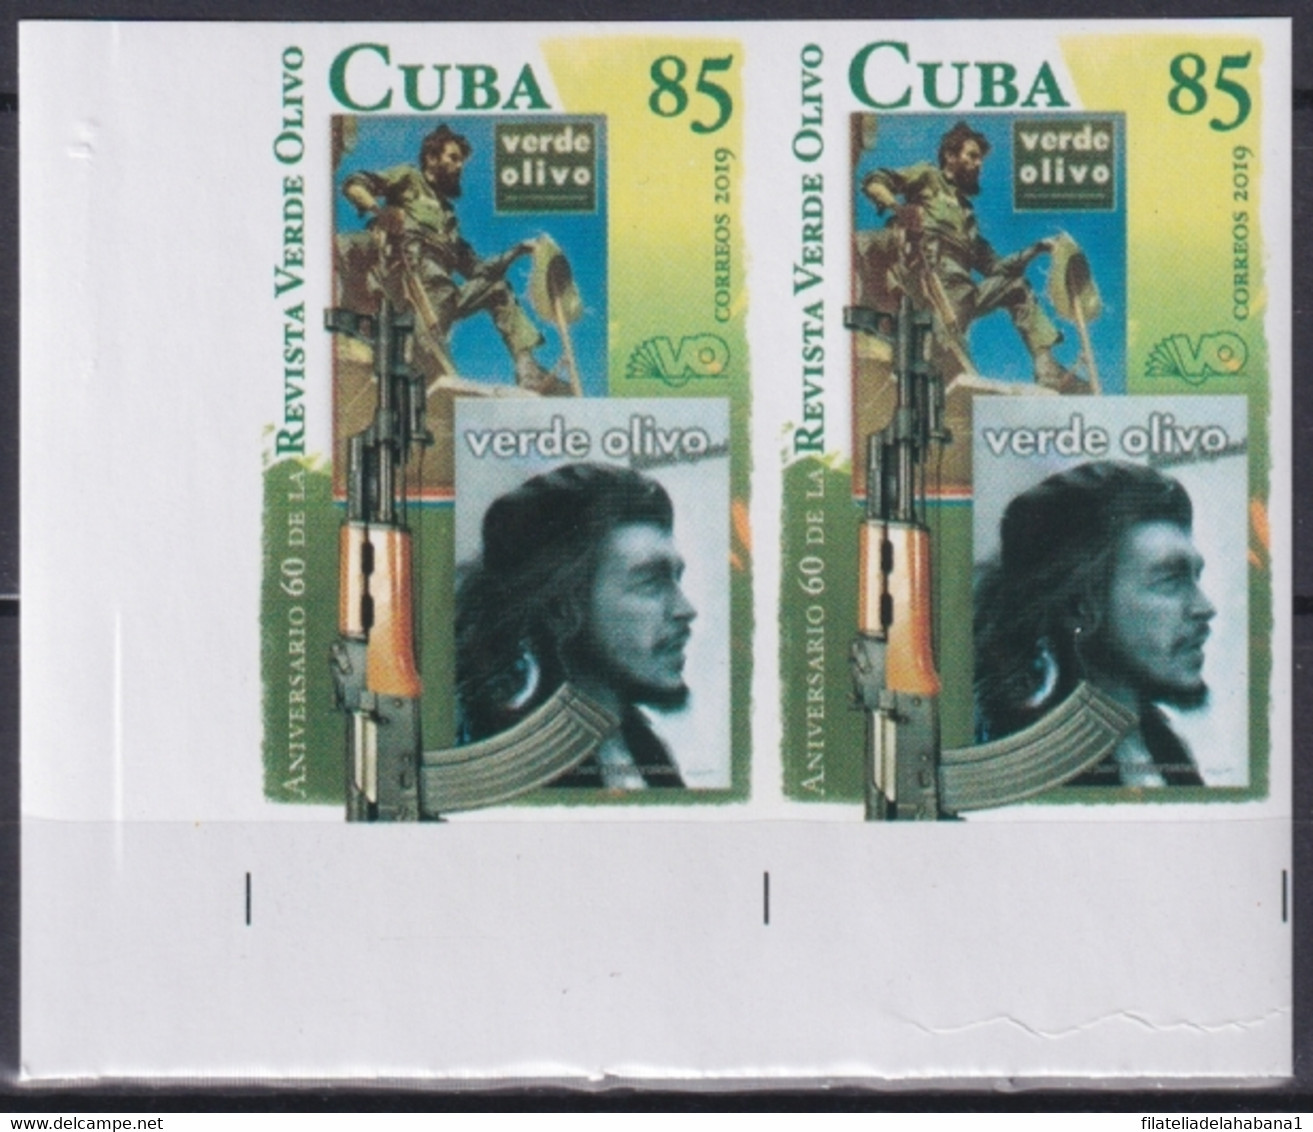 2019.226 CUBA MNH 2019 IMPERFORATED PROOF 85c ERNESTO CHE GUEVARA REVISTA VERDE OLIVO. - Imperforates, Proofs & Errors